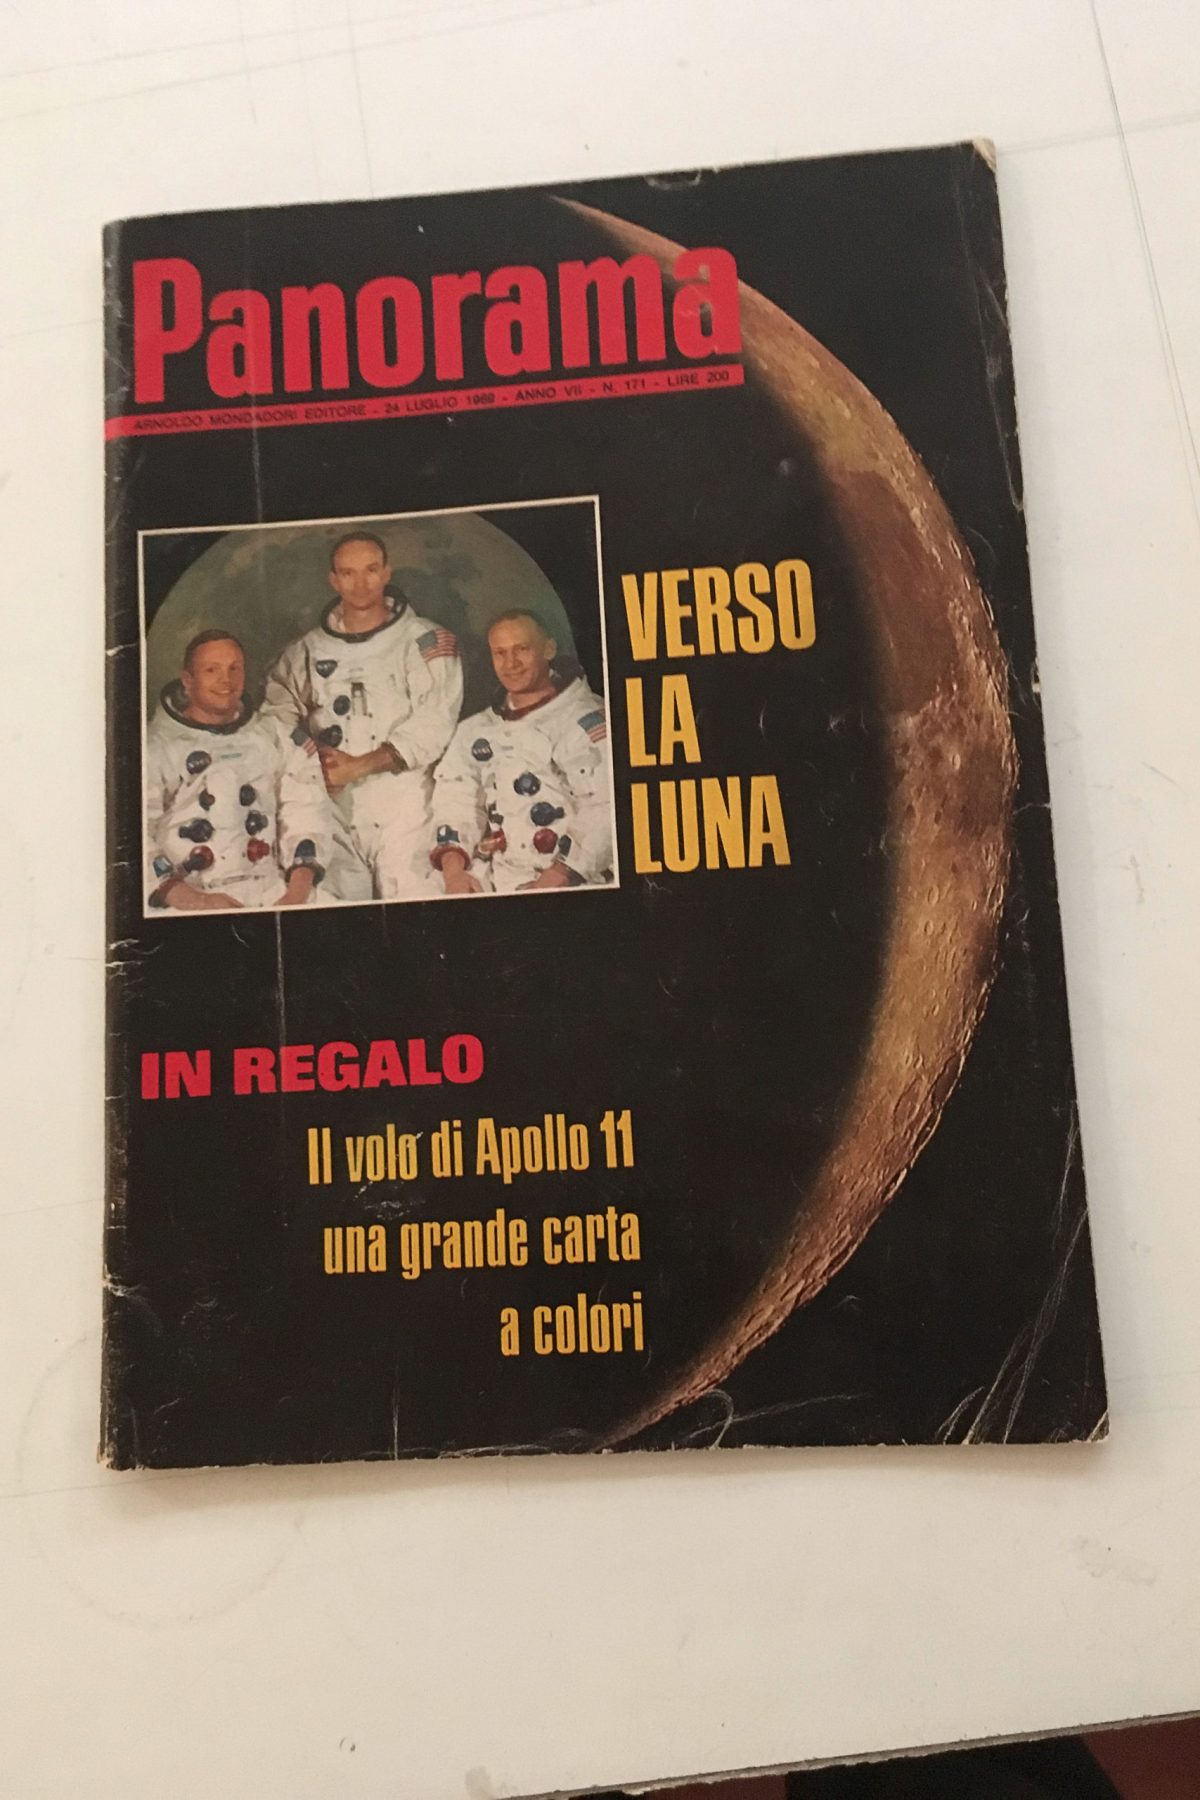 On the Moon.
Among tons of many other things, we chose to keep as an omen the July 1969
issue of "Panorama" celebrating the Apollo 11 mission to the Moon.